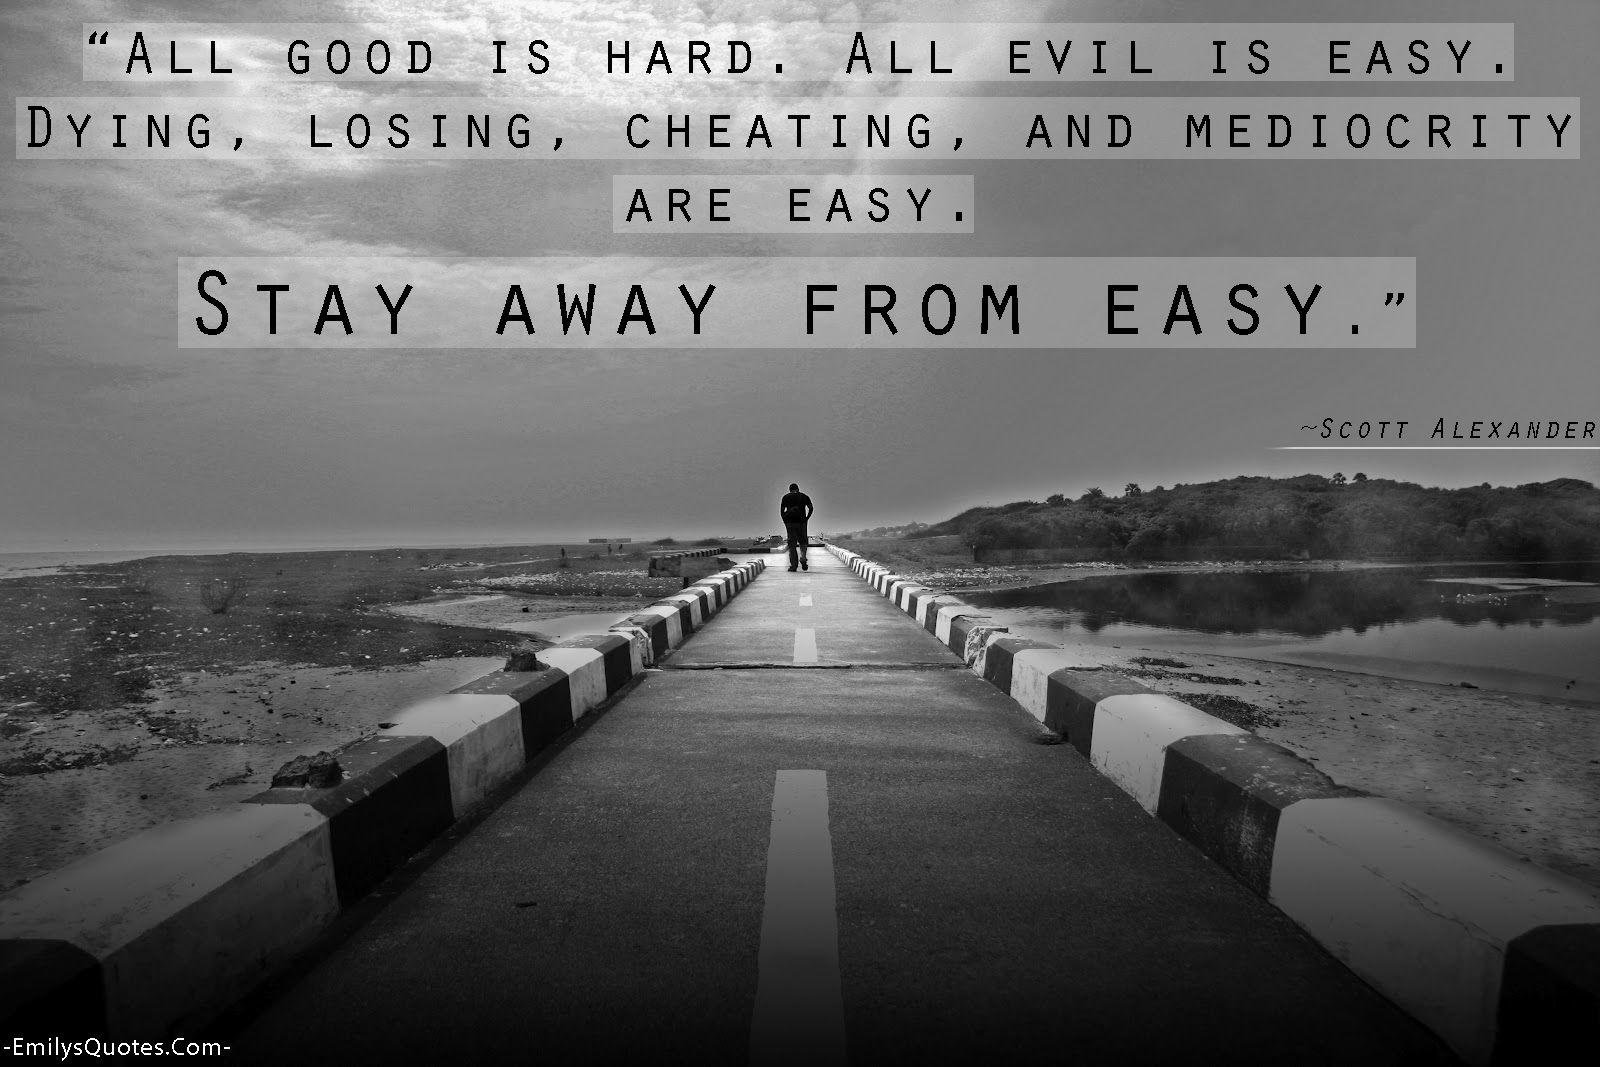 EmilysQuotes.Com-good-hard-evil-dying-losing-cheating-mediocrity-easy-being-a-good-person-choice-consequences-Scott-Alexander.jpg